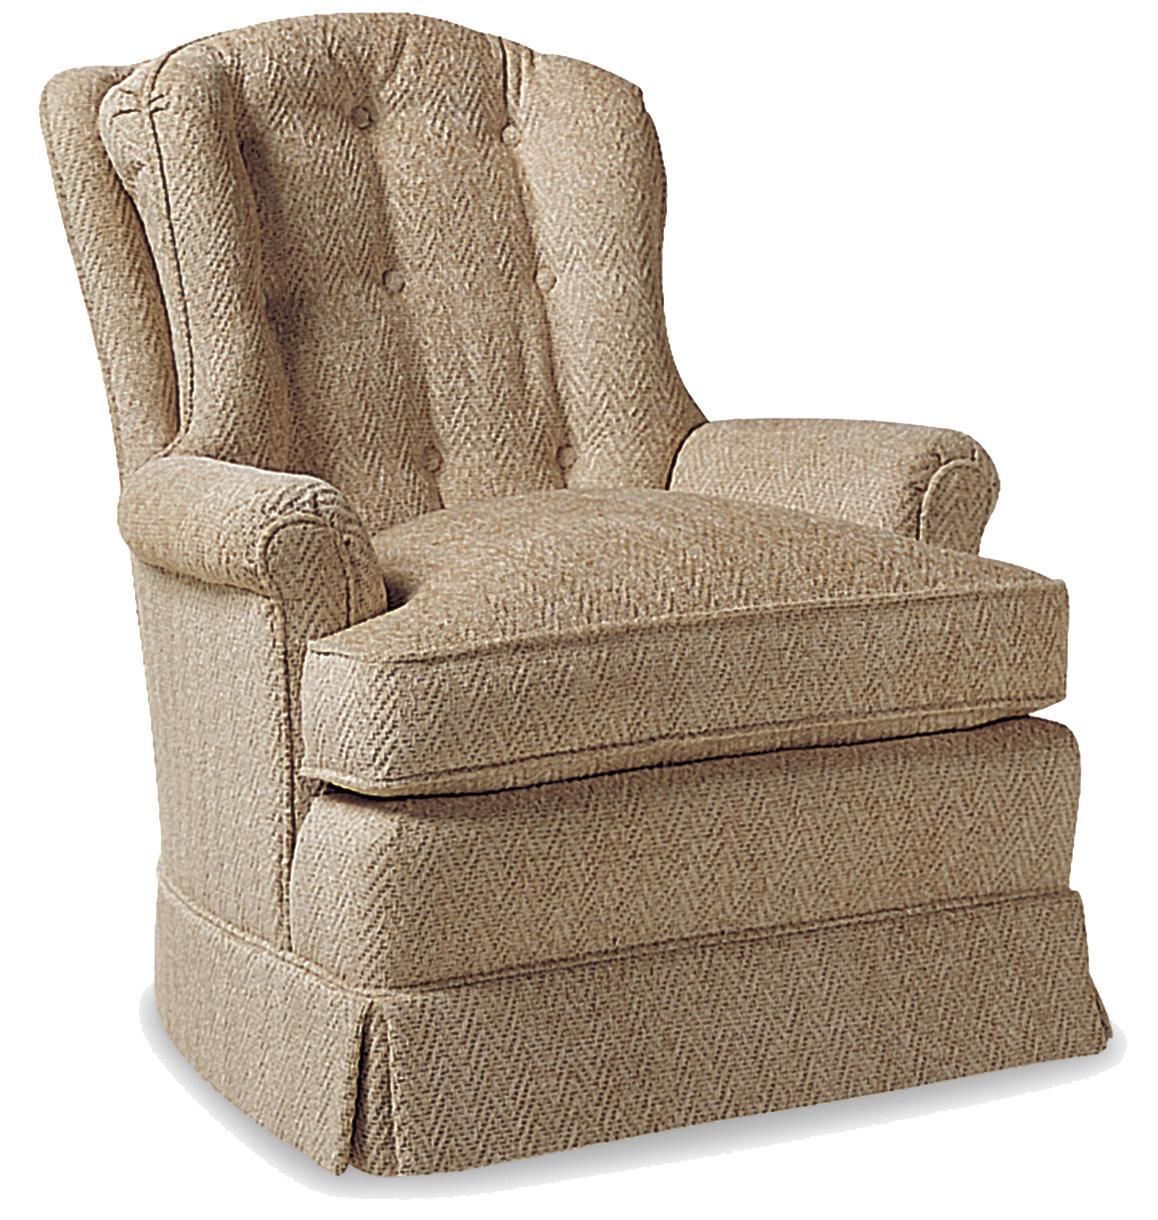 Fine Upholstered Accents O'connor Swivel Rockerjessica Charles For Twirl Swivel Accent Chairs (View 15 of 25)